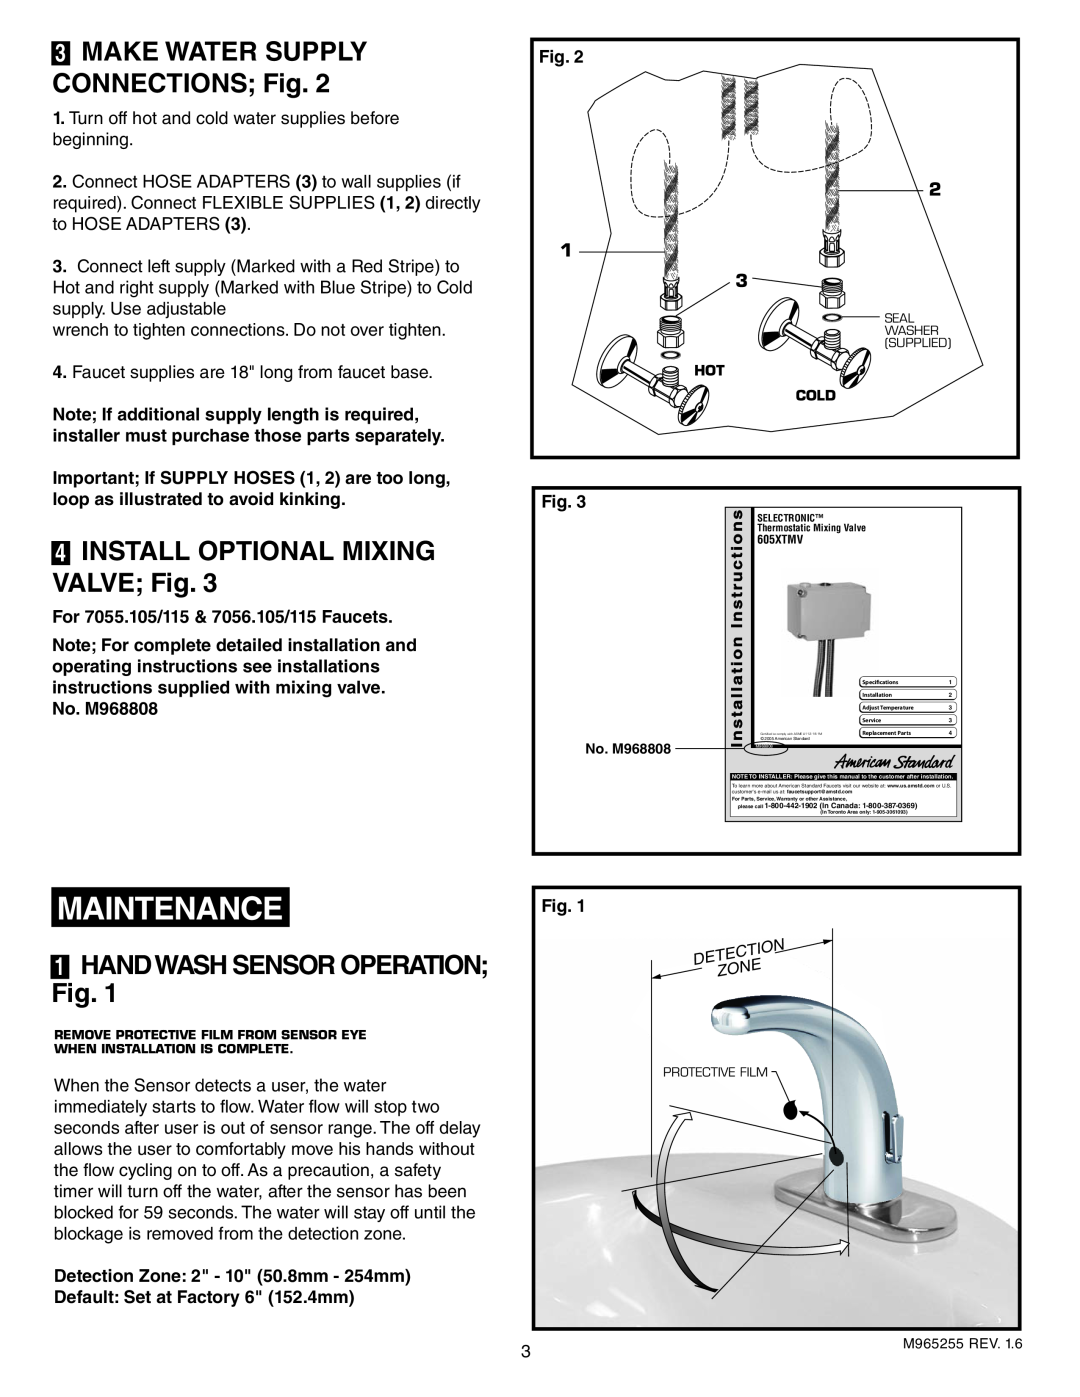 American Standard 7056.215 Maintenance, MAKE WATER SUPPLY CONNECTIONS Fig, INSTALL OPTIONAL MIXING VALVE Fig, Installation 